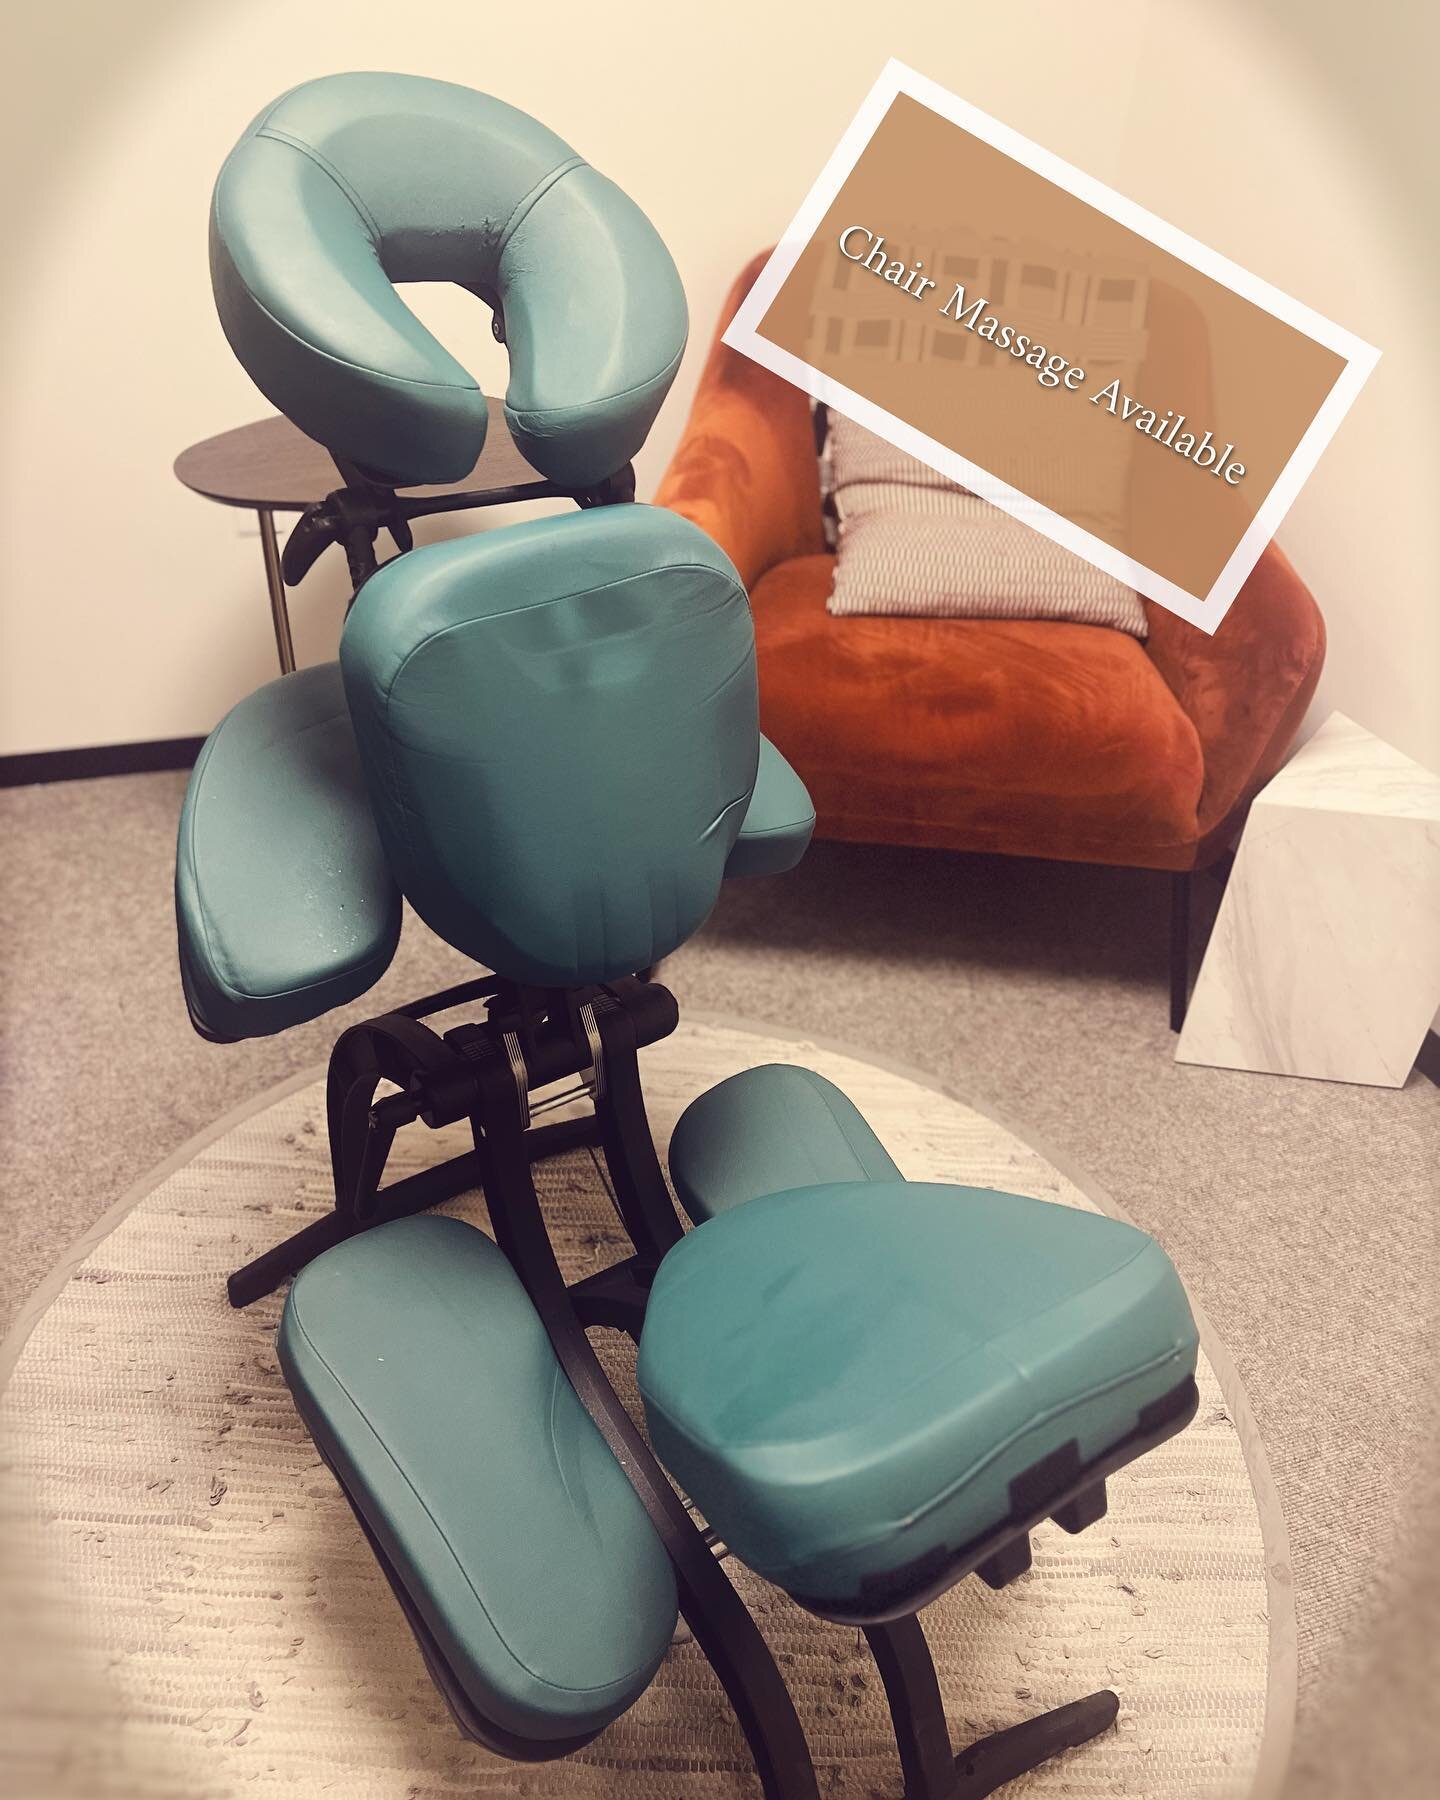 Chair massage available for events! 

On-site chair massage is a great way to recognize your employees and show them appreciation, or add an element of self-care to an event. 

Massages can be done in 10-30 minute sessions and require a small space. 